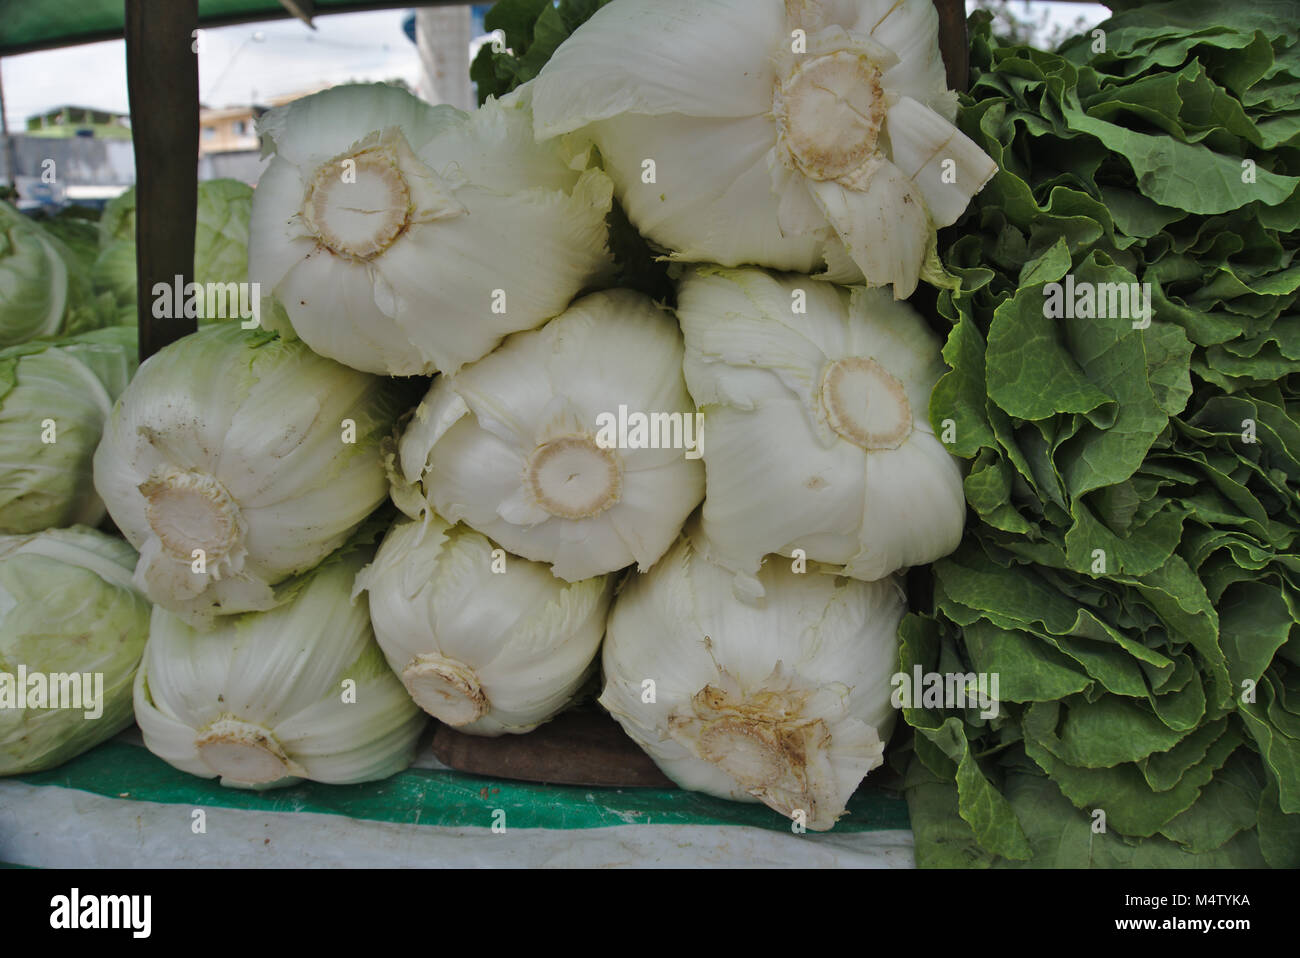 Cabbage at a farmers market stall. Stock Photo